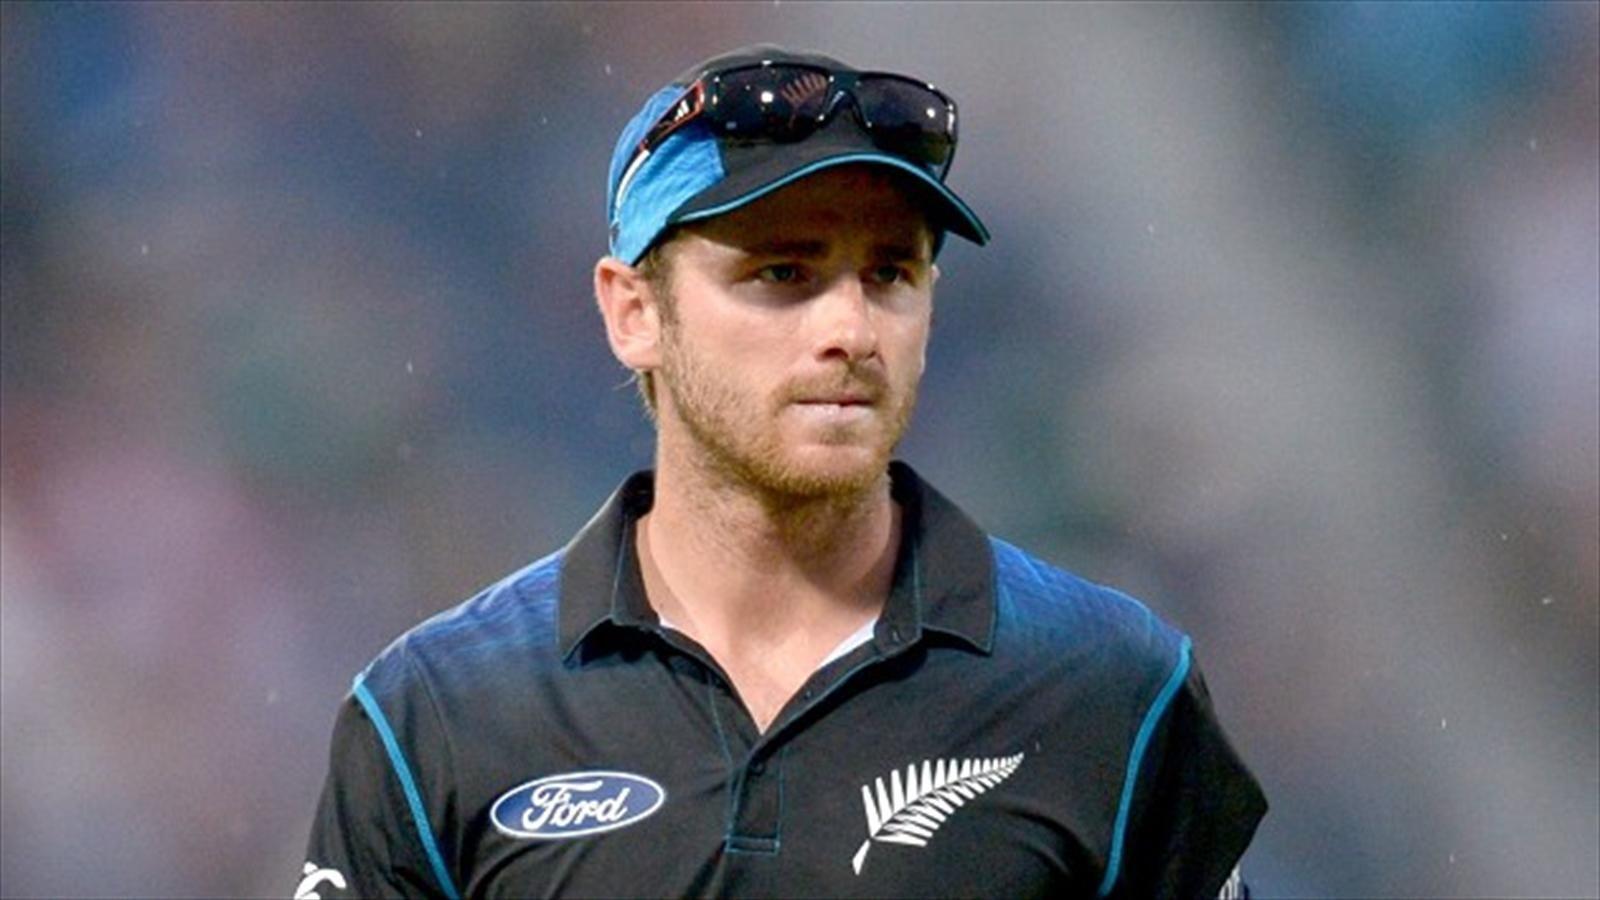 Kane Williamson returns to Yorkshire for a third spell